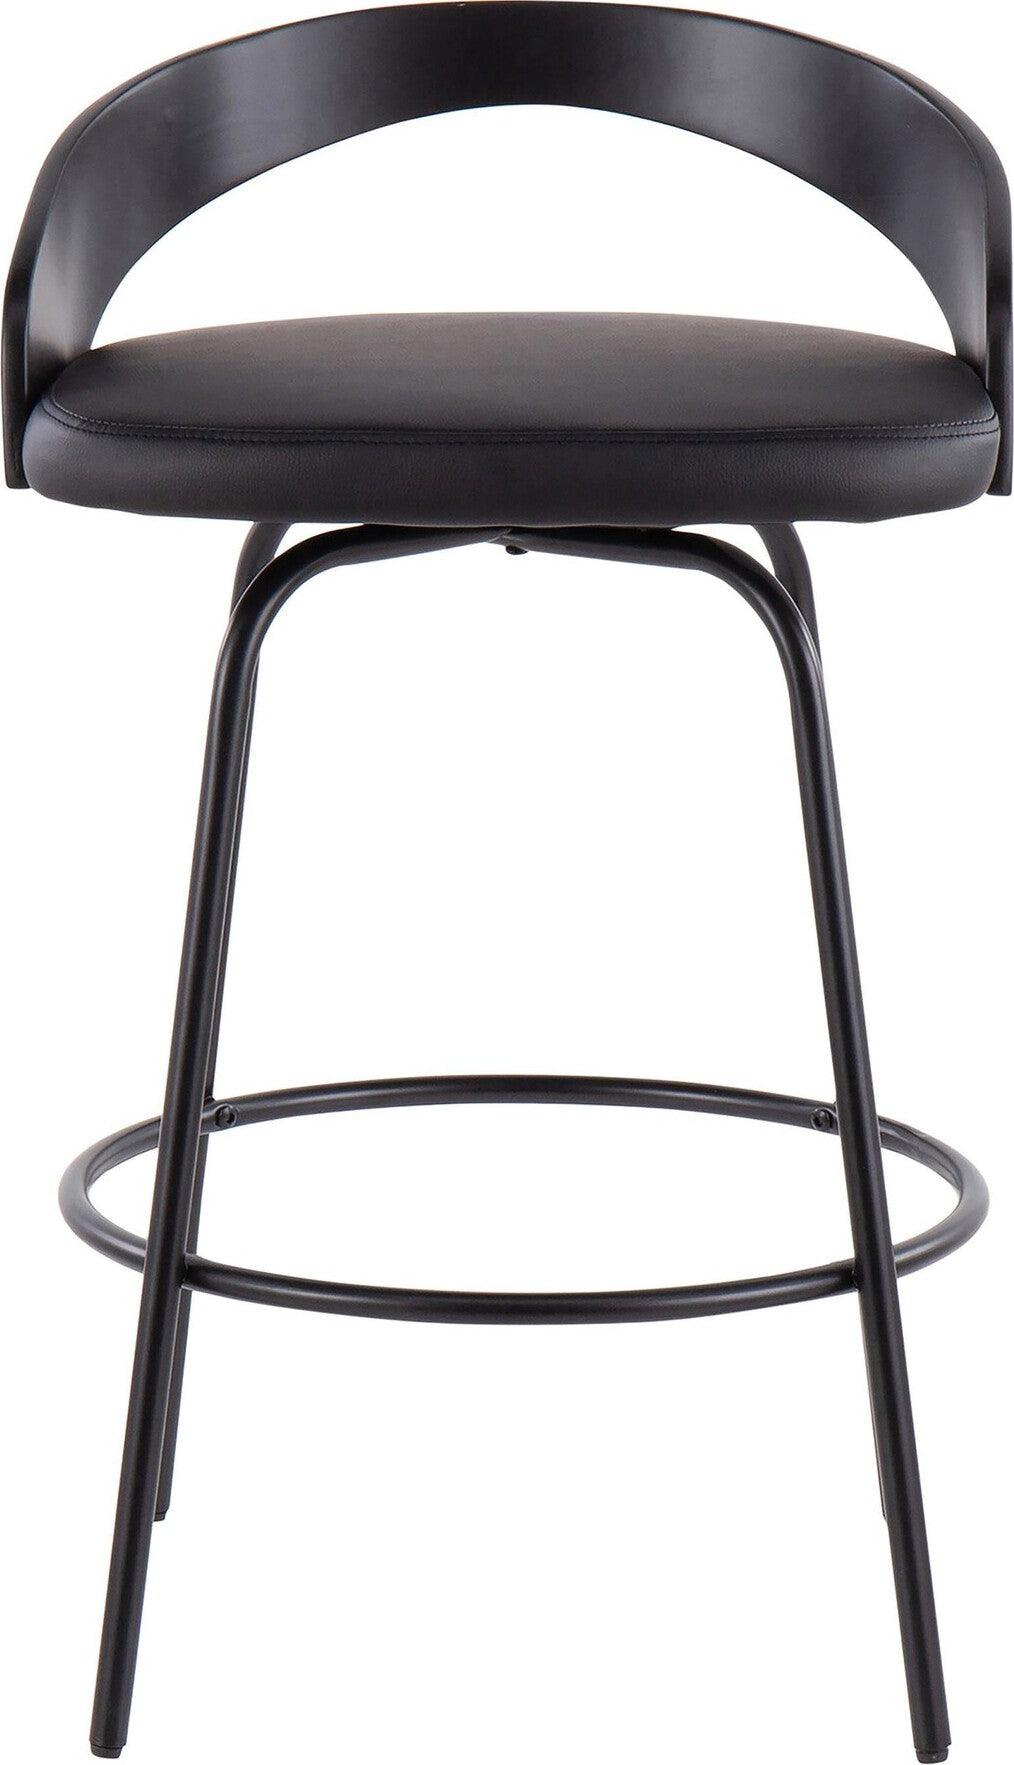 Lumisource Barstools - Grotto Claire Swivel Fixed Height Counter Stool (Set of 2) Black